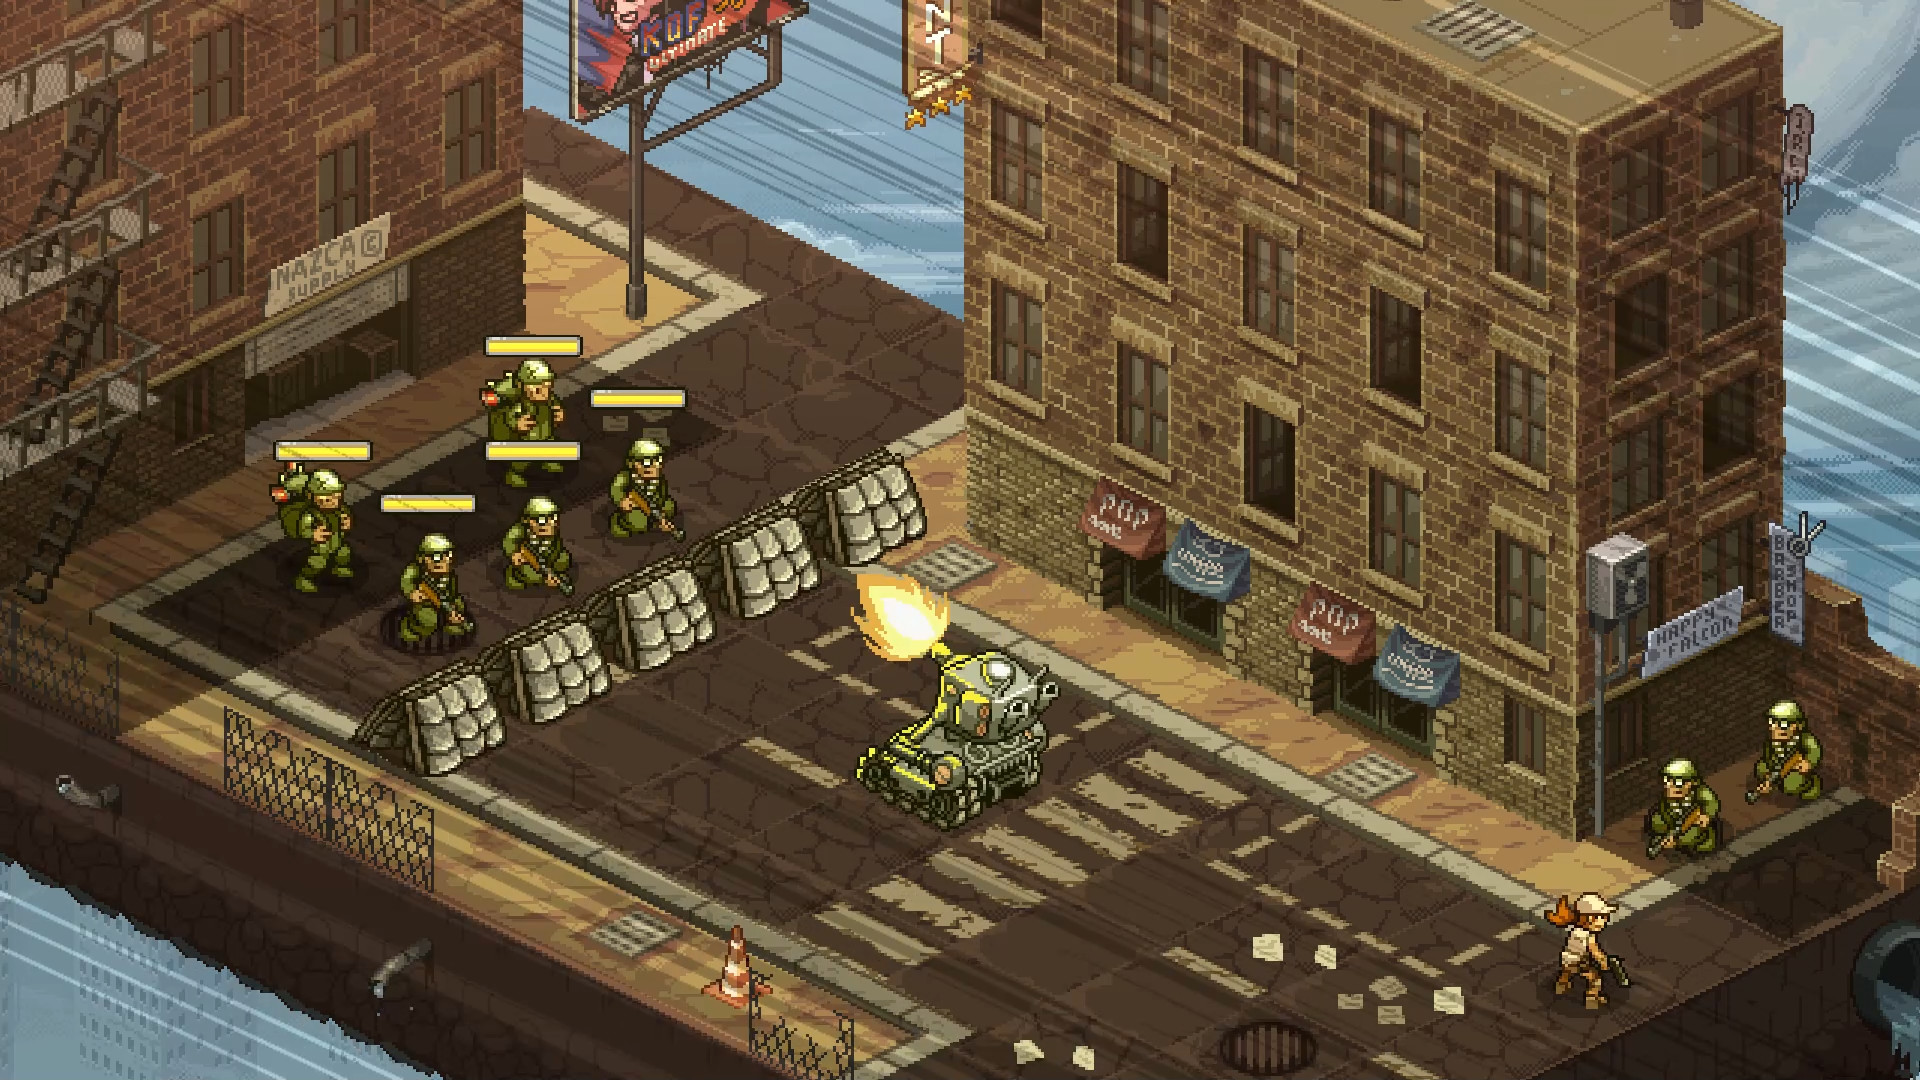 Soldiers facing off against a tank in an image meant to represent the Metal Slug Tactics delay